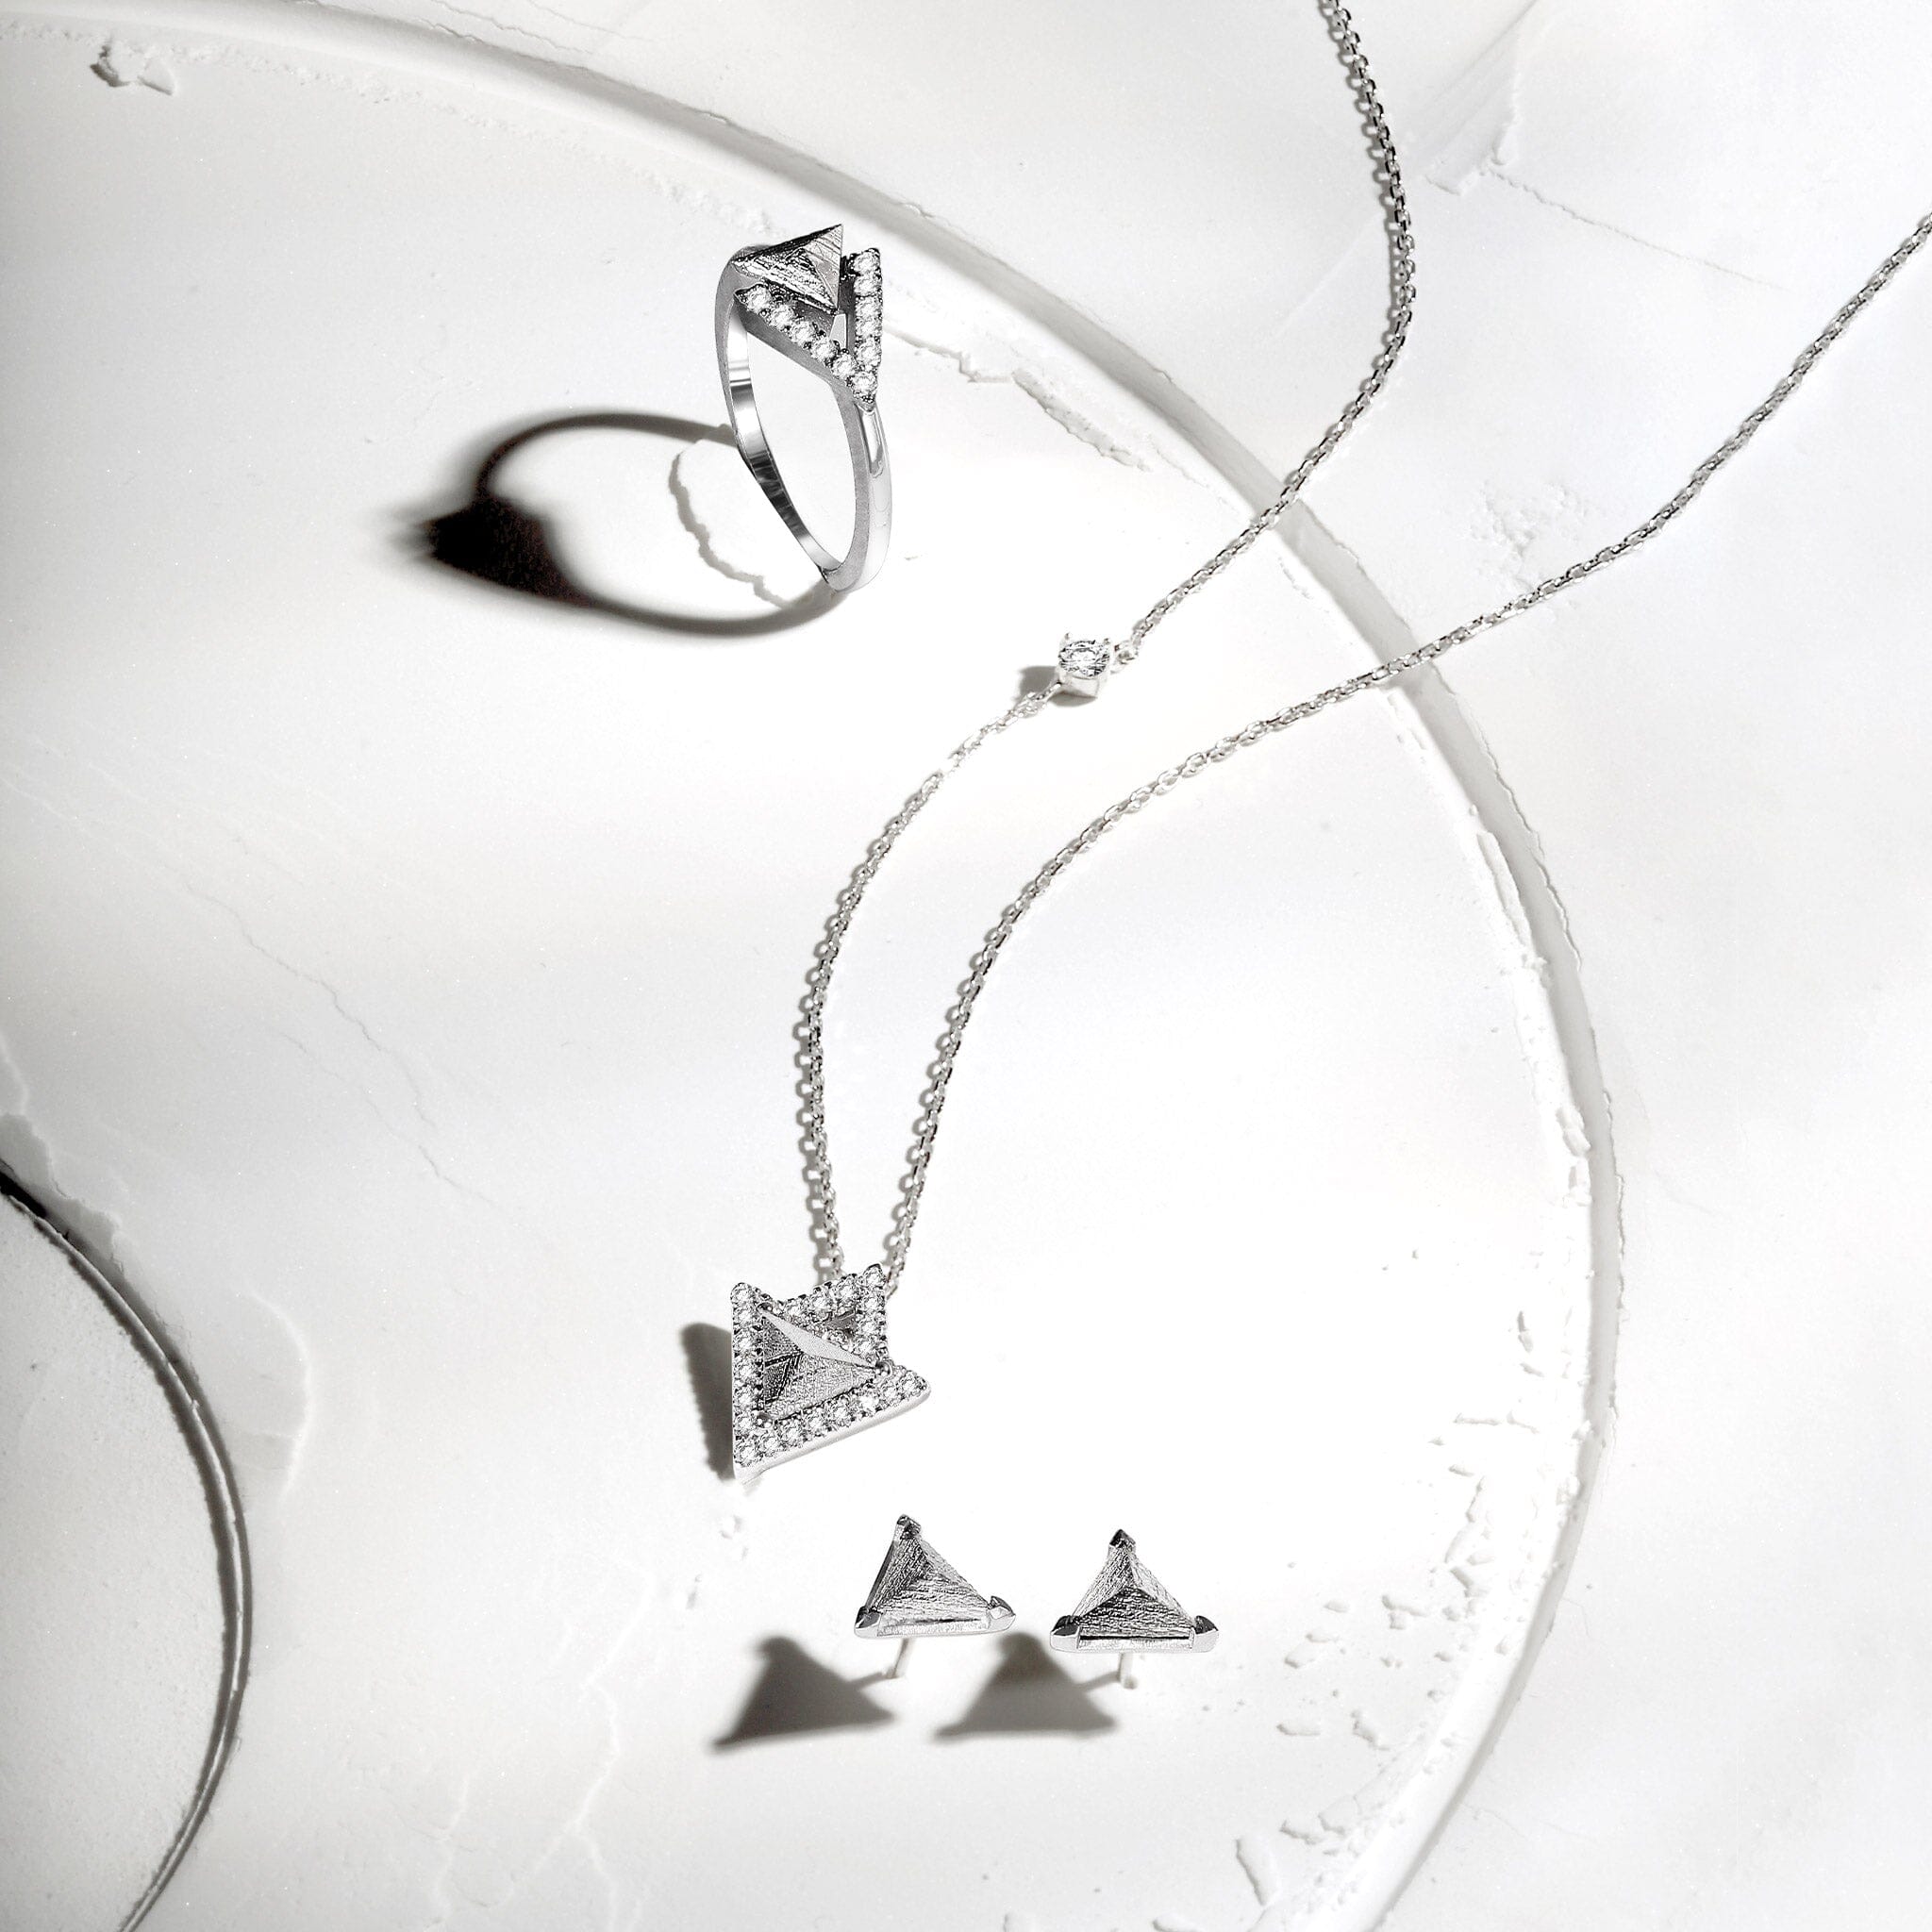 Women's Platinum Triangle Studs with Meteorite Earrings AWNL 